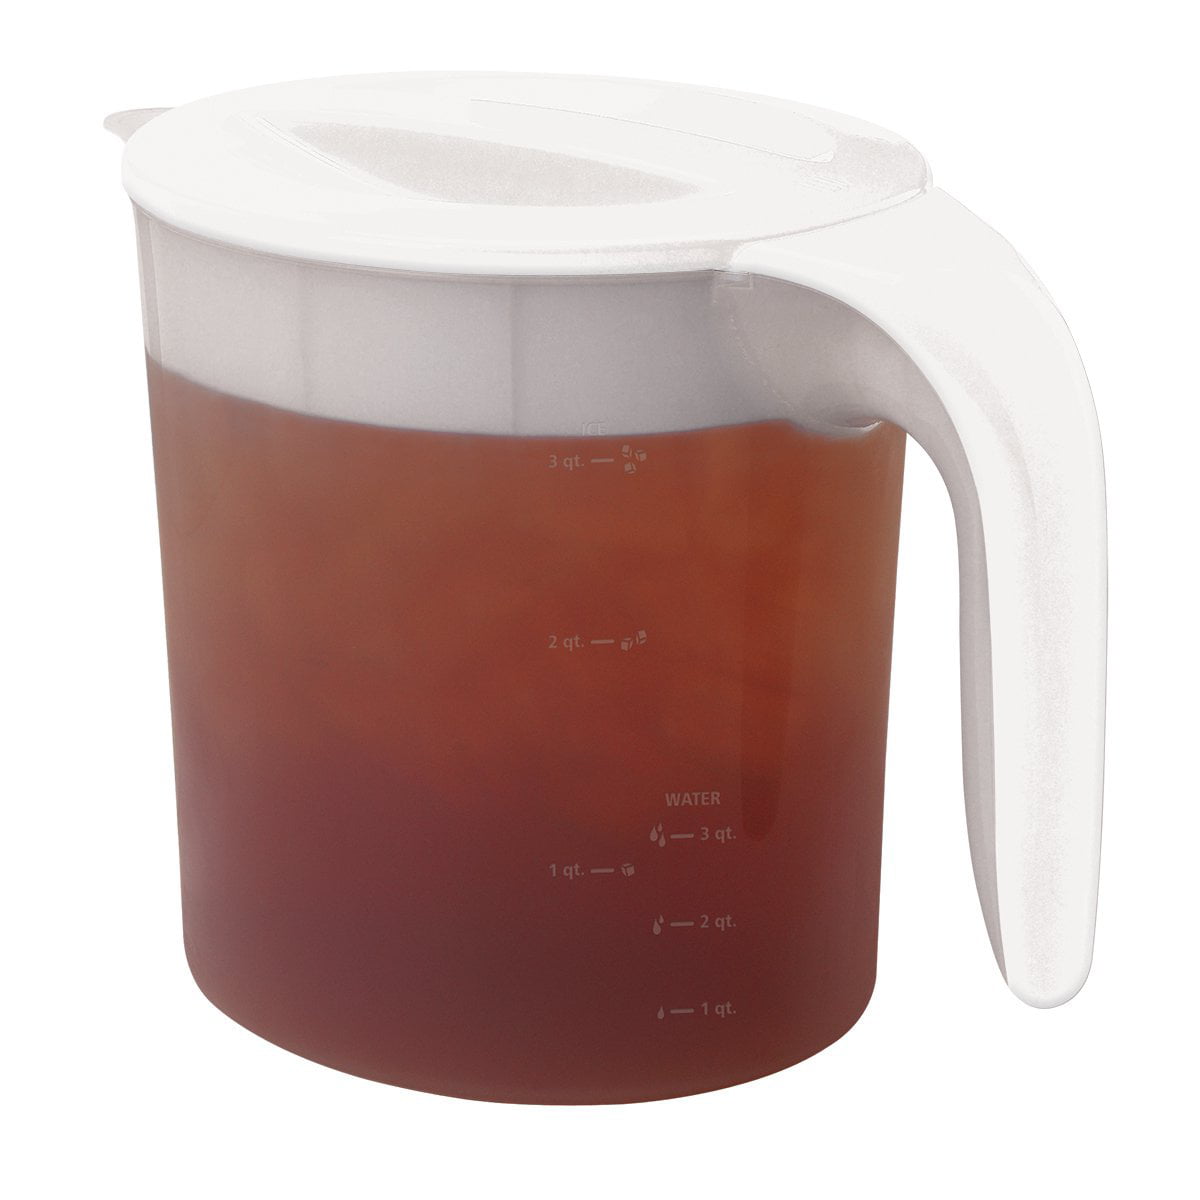 Mr. Coffee TP1-2 Replacement Pitcher For Iced Tea Maker, 2 Quart